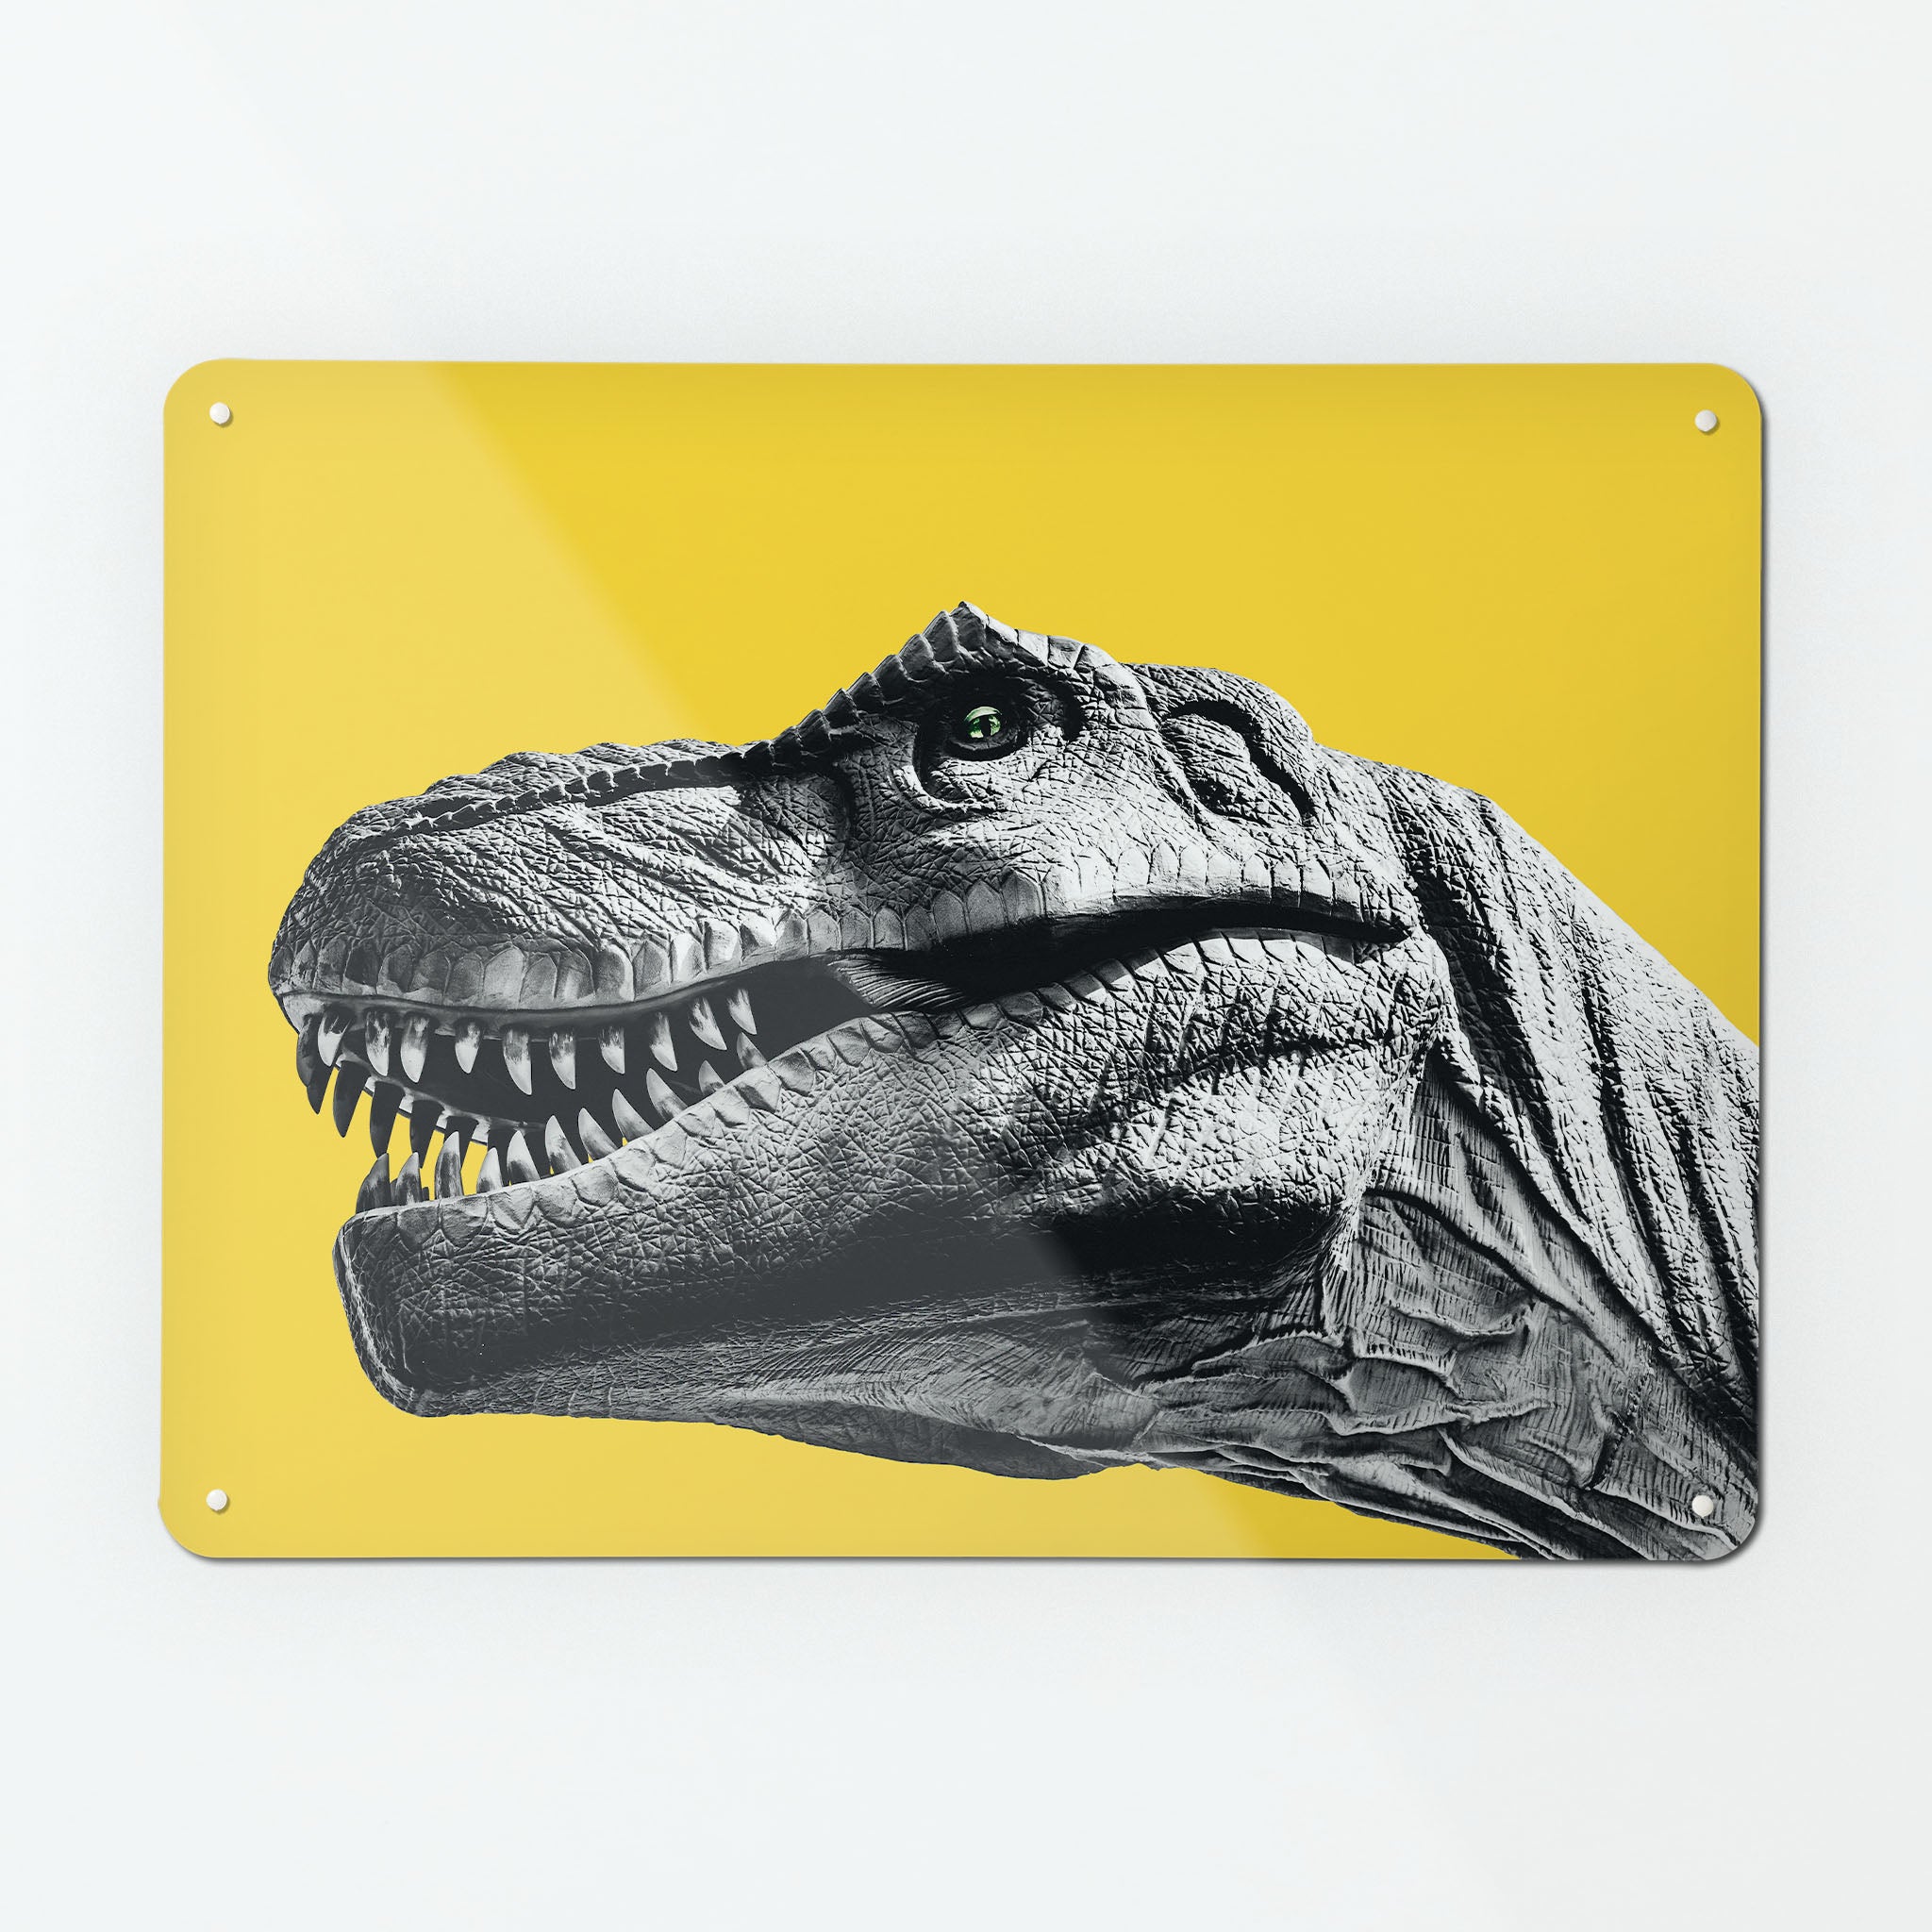 A large magnetic notice board by Beyond the Fridge with an image of a black and white tyrannosaurus rex dinosaur on a yellow background